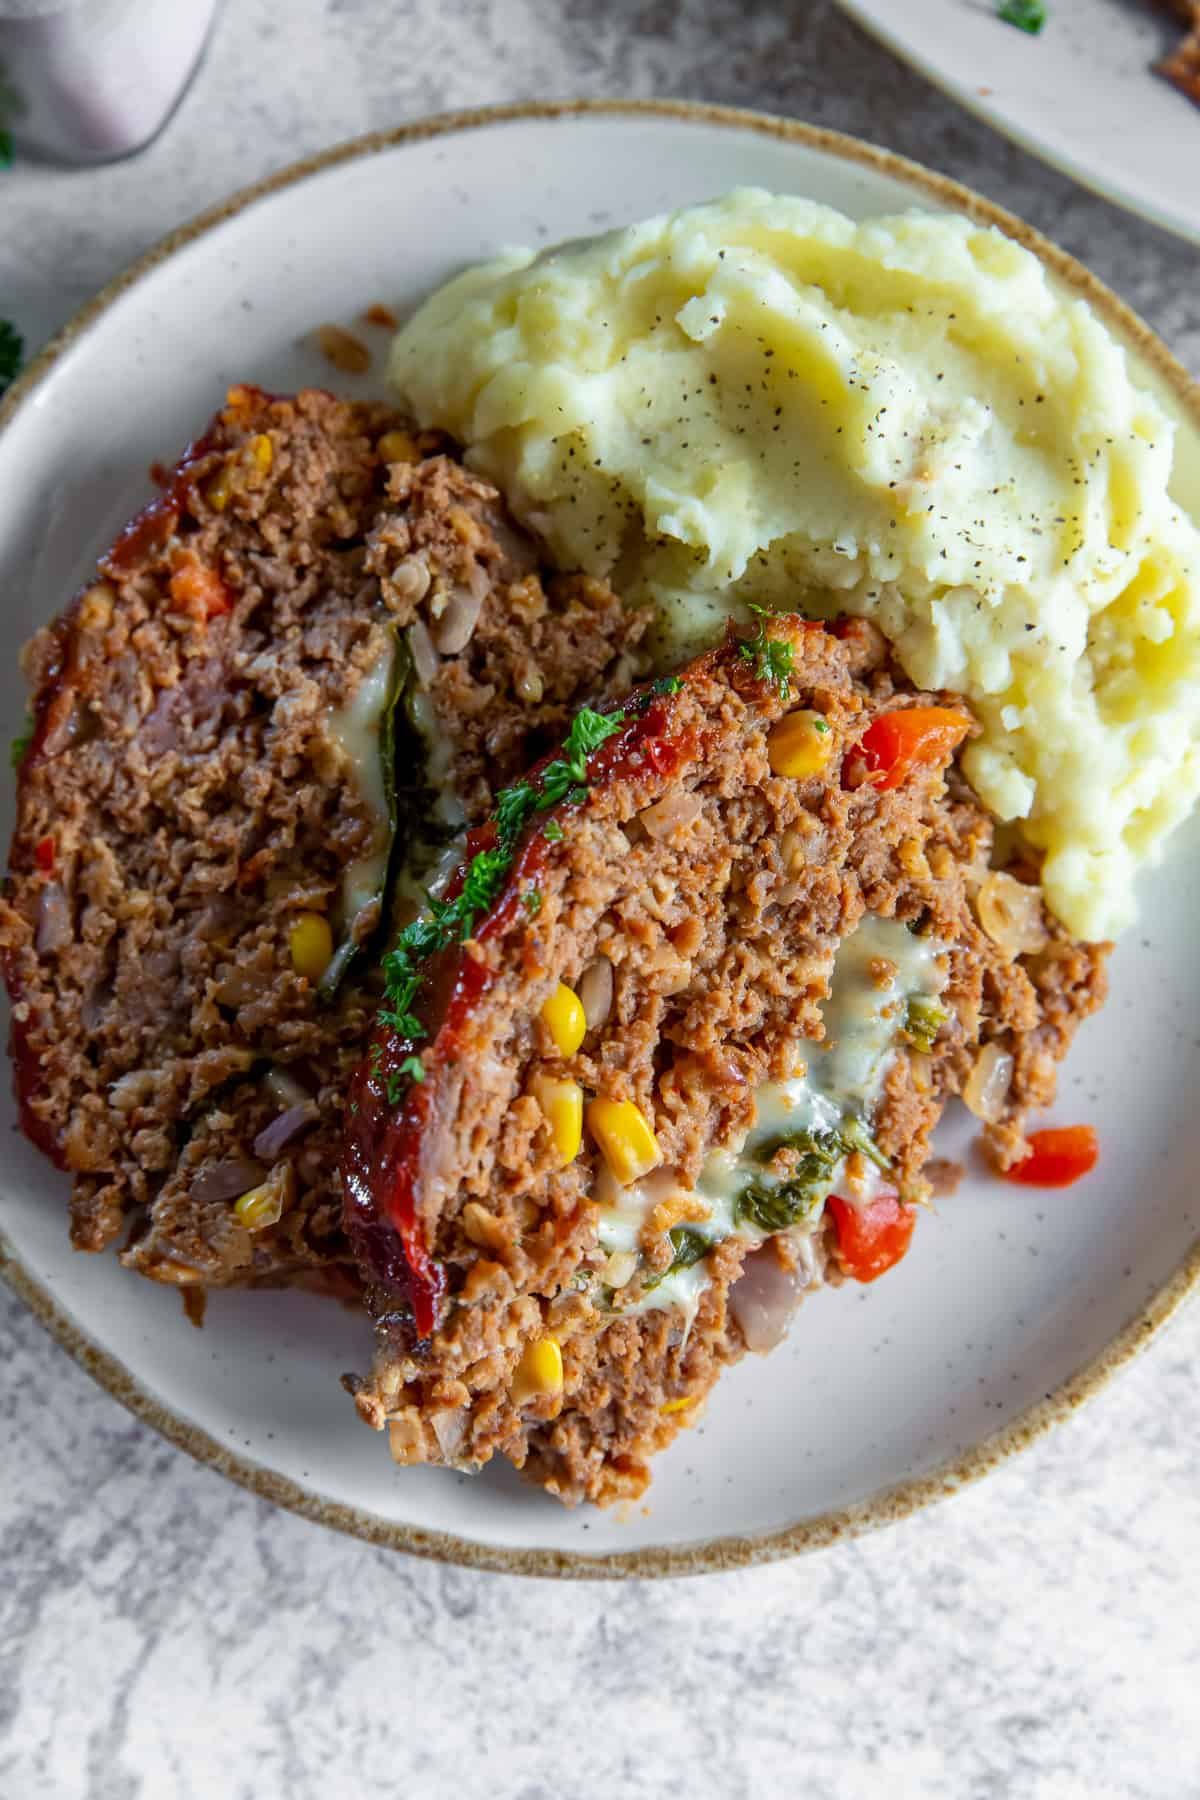 Two slices of cheese stuffed meatloaf on a plate with mashed potatoes.